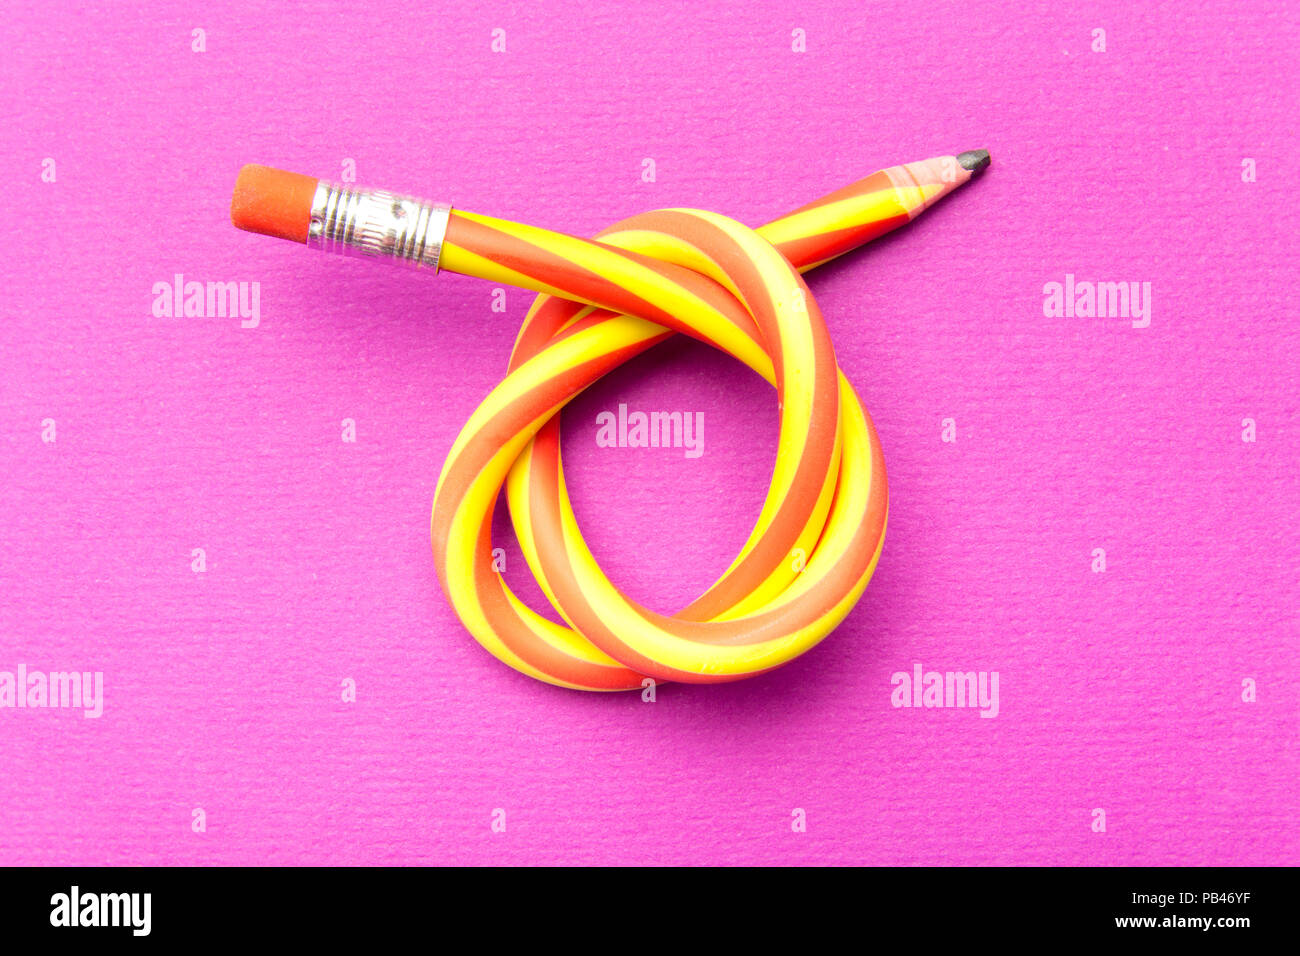 Flexible pencil on a turquoise notebook. Bent pencils two-color Stock Photo  - Alamy